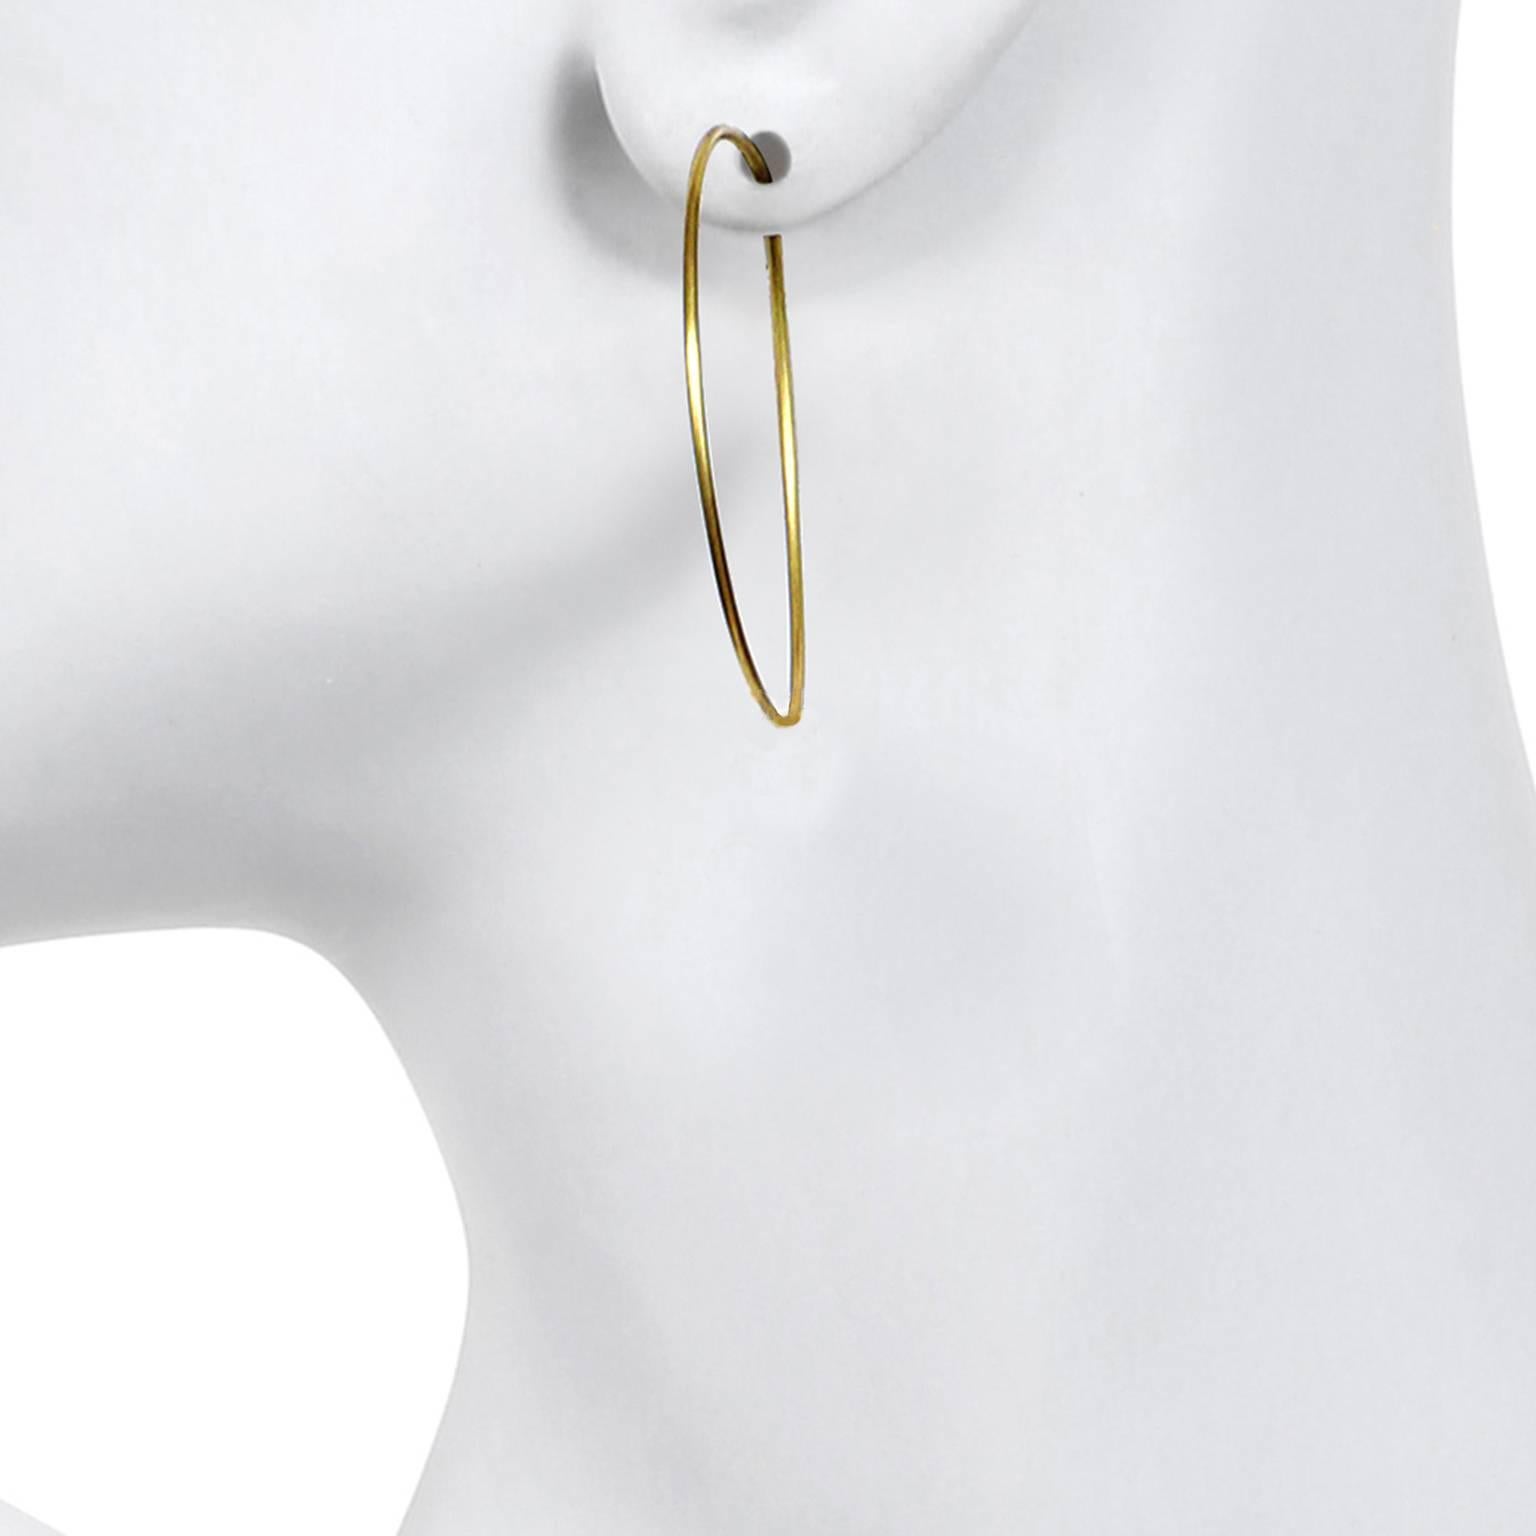 Faye Kim's 18 Karat Gold handmade wire hoops are a must-have in every jewelry wardrobe.  Casual, chic and wearable every day, the hoops give endless opportunities to change your look with different drops. Start with the triple green tourmaline drops